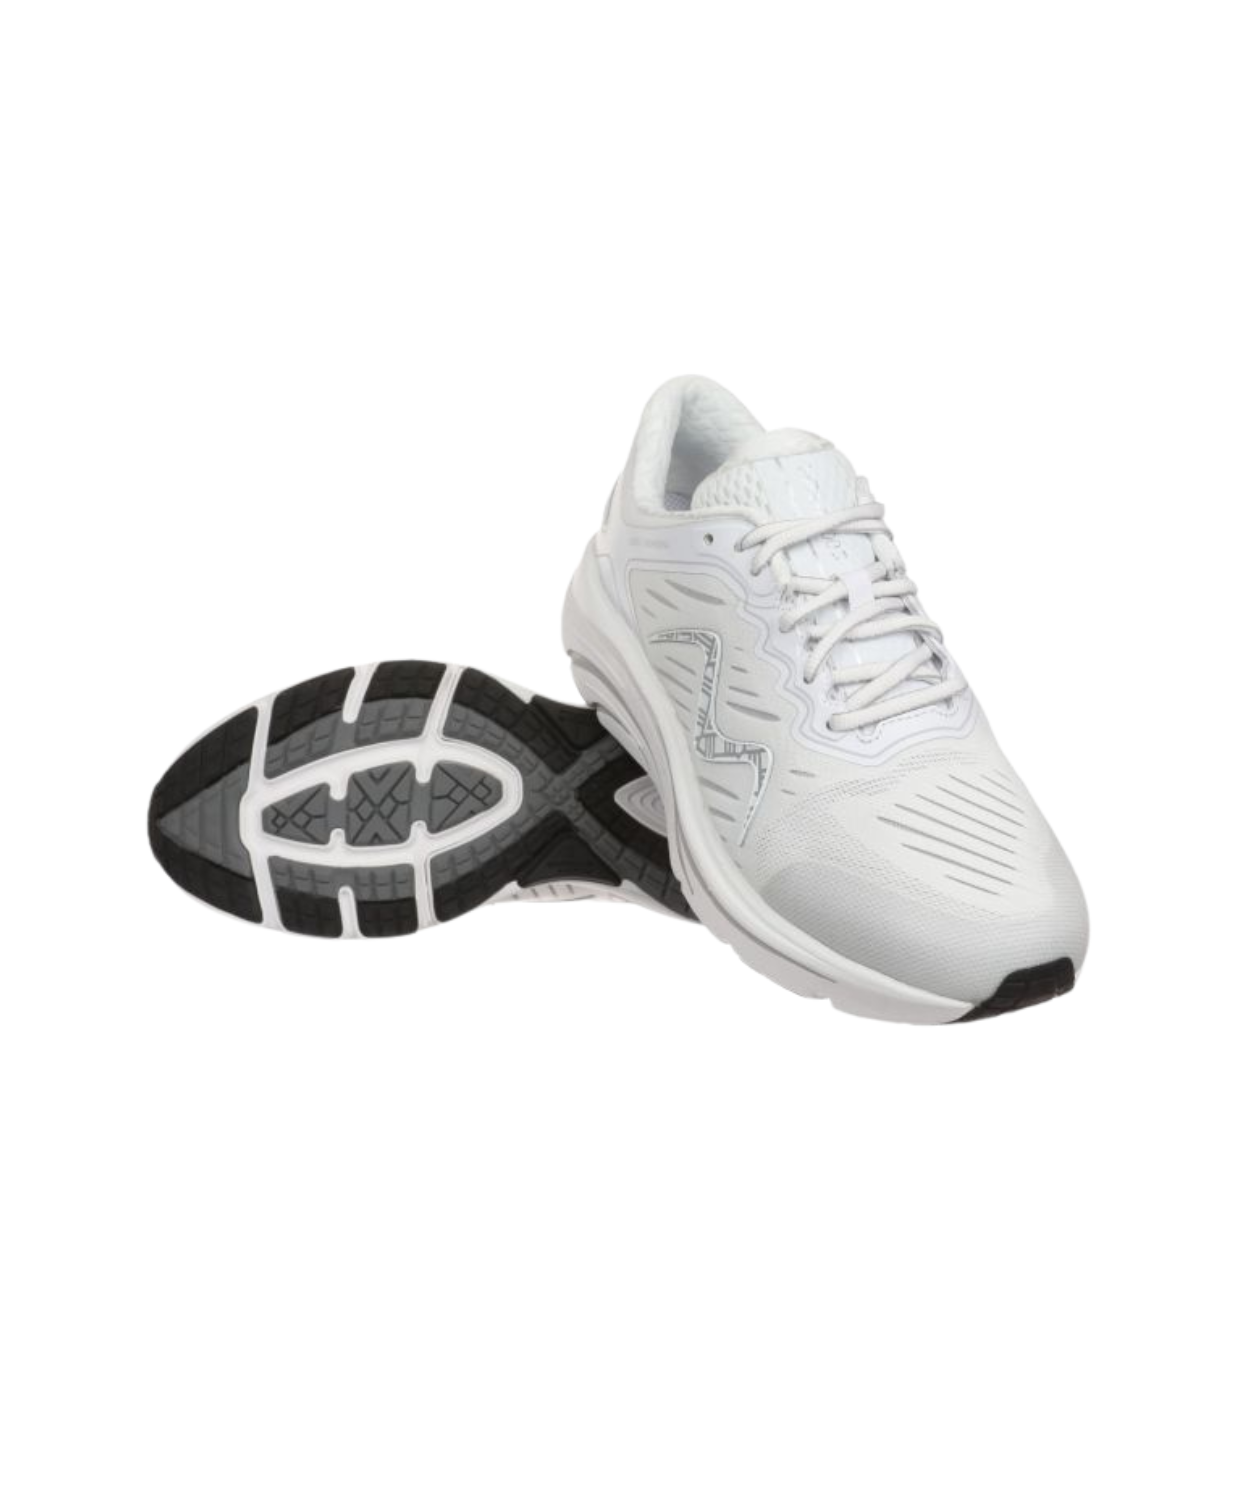 MBT MBT-2000 II Lace Up White Womens Sneakers